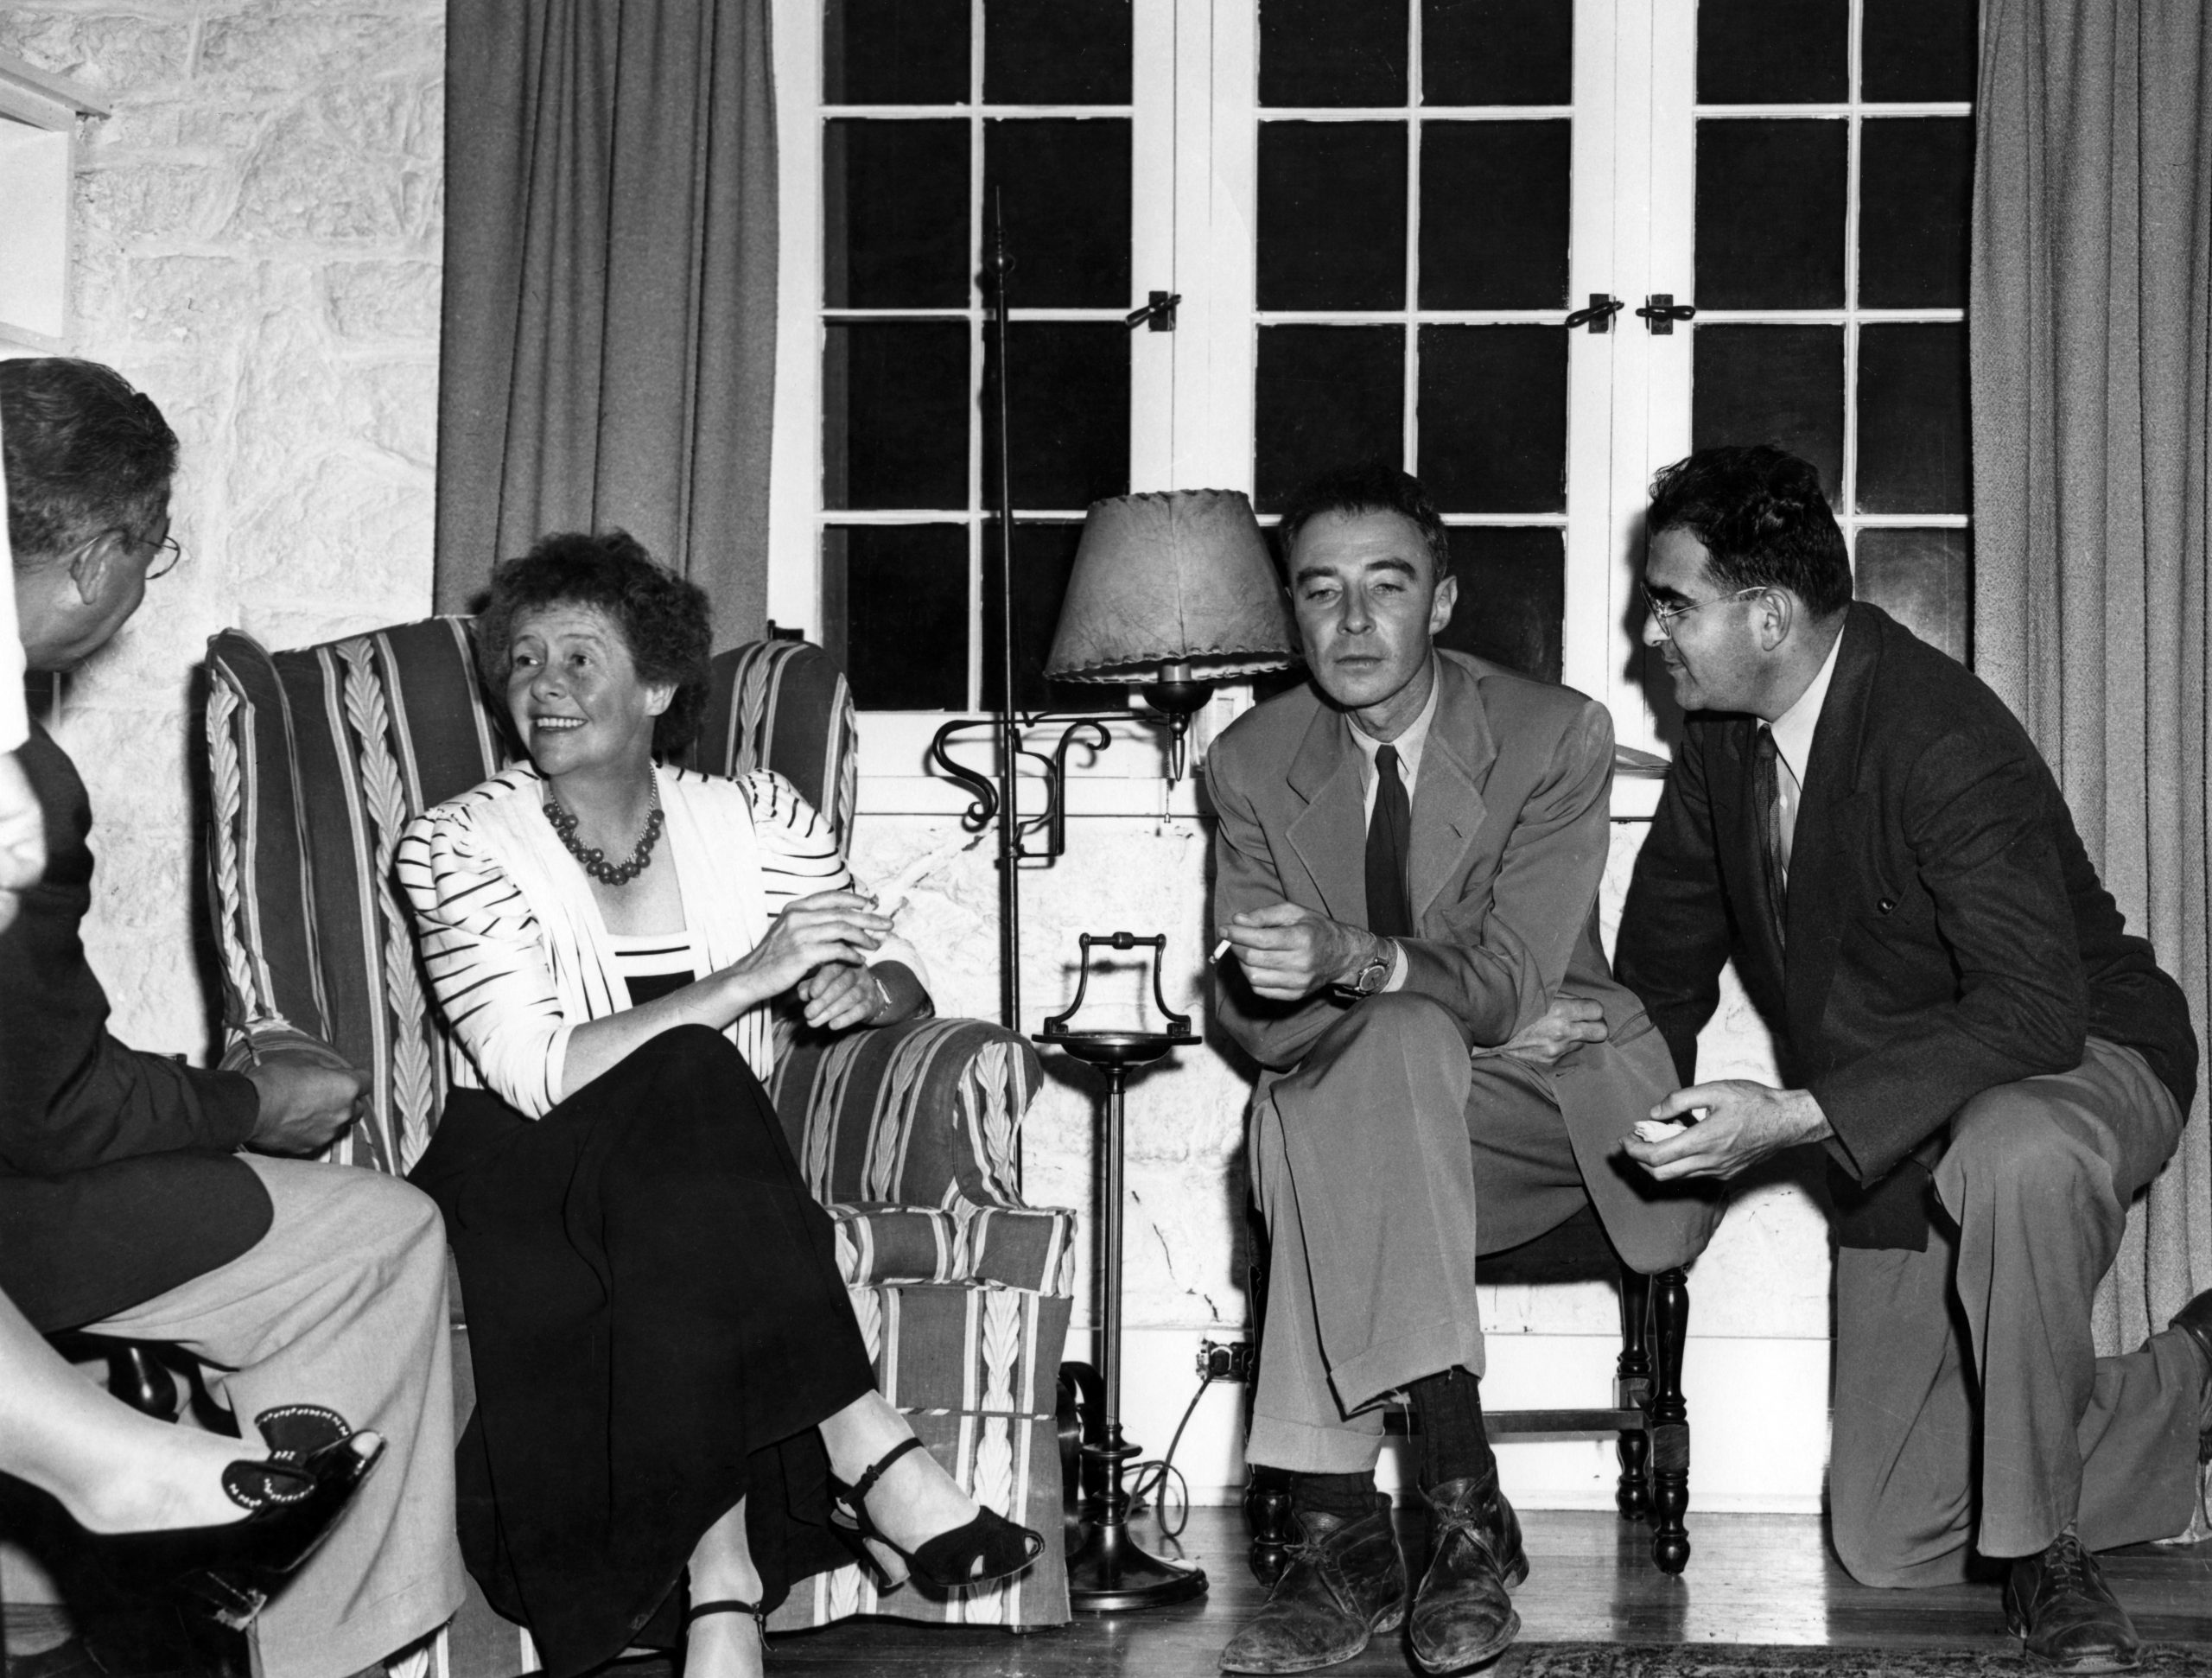 J. Robert Oppenheimer hosting a party at his home in Los Alamos